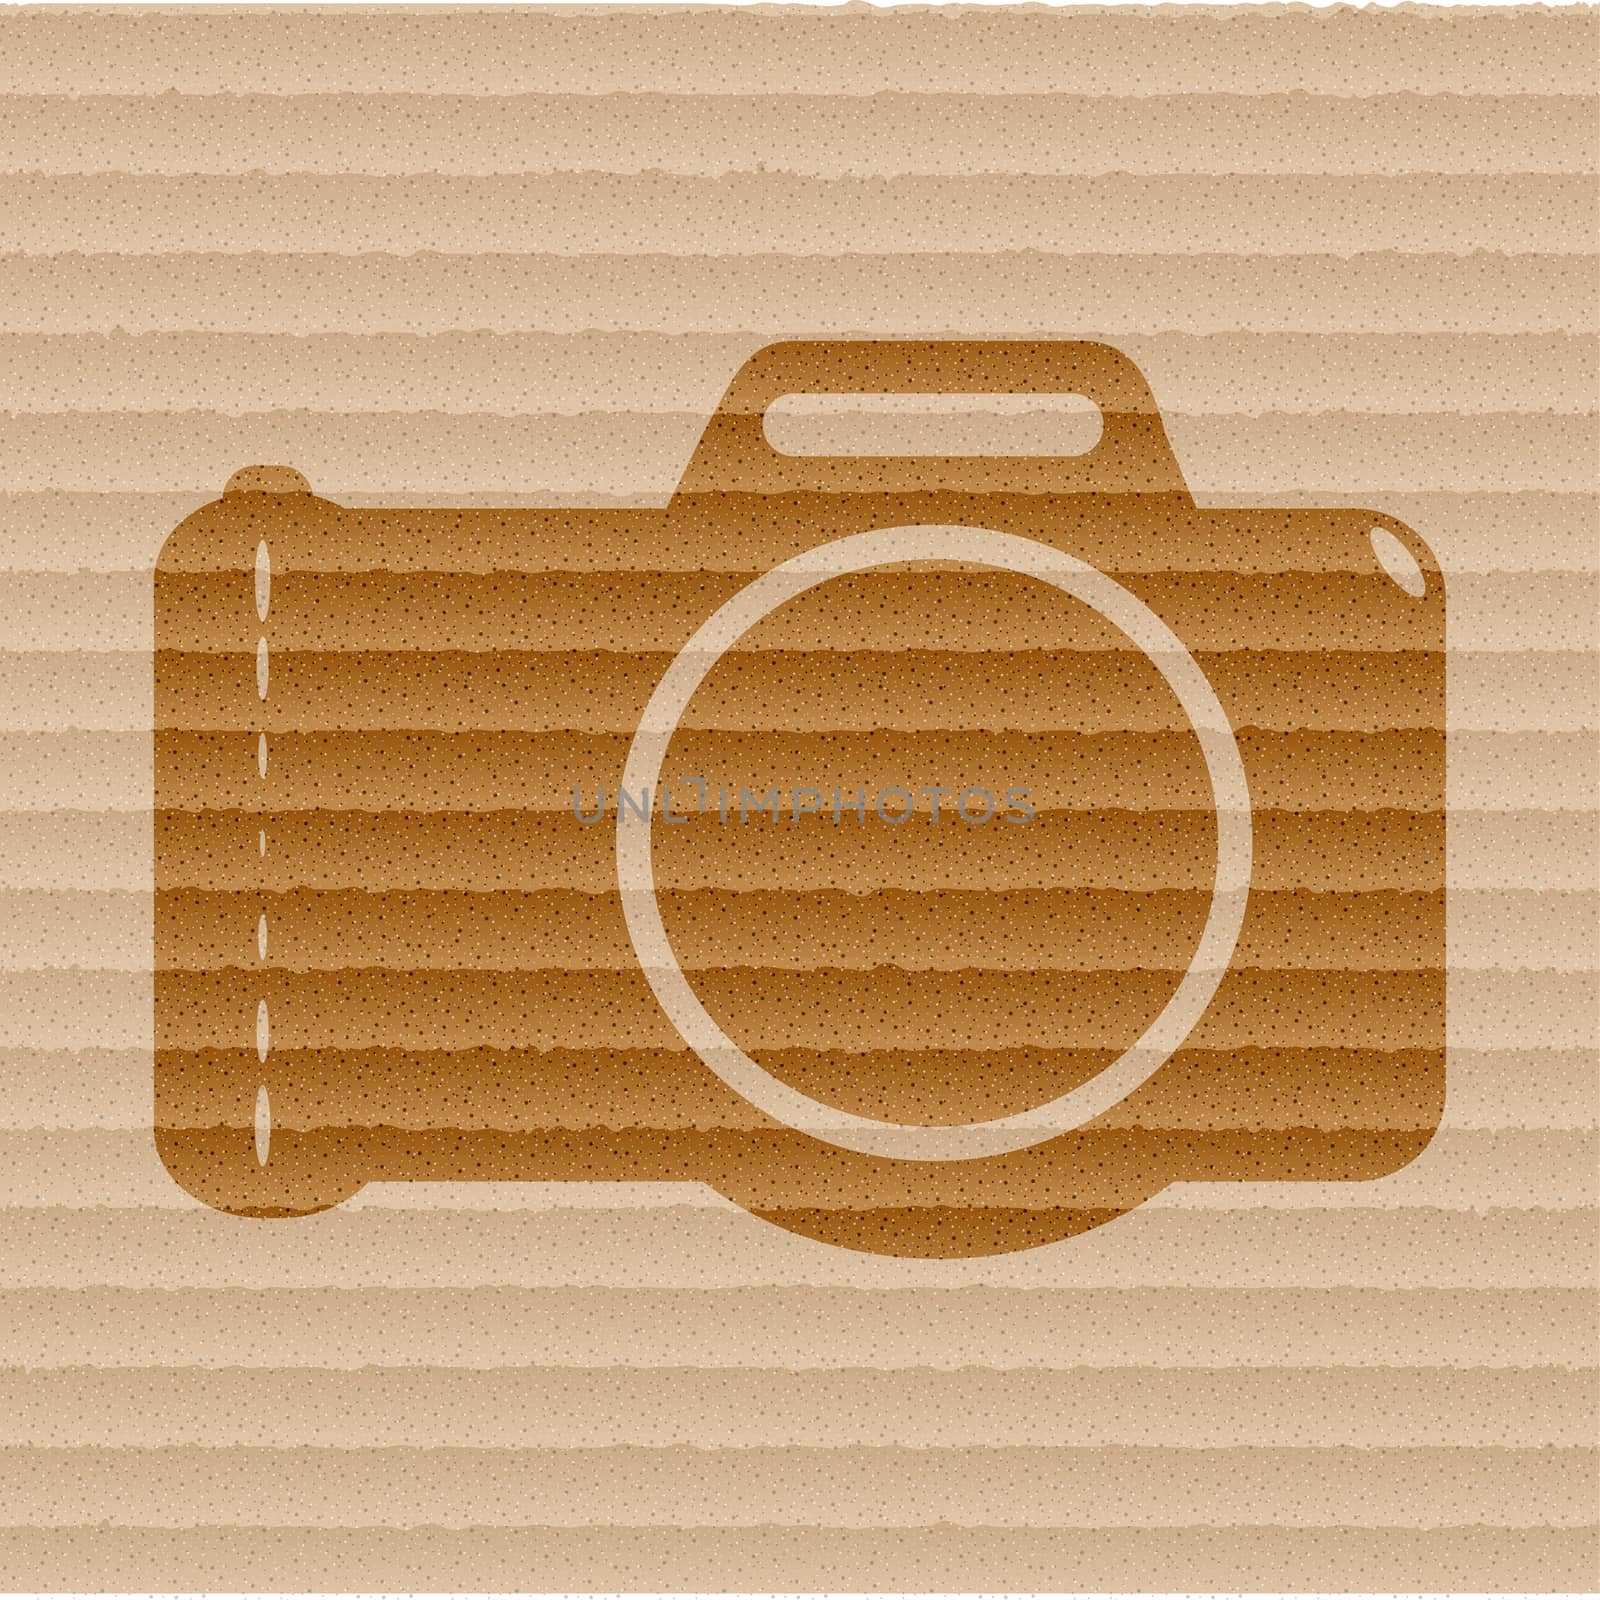 Photo camera icon flat design with abstract background.